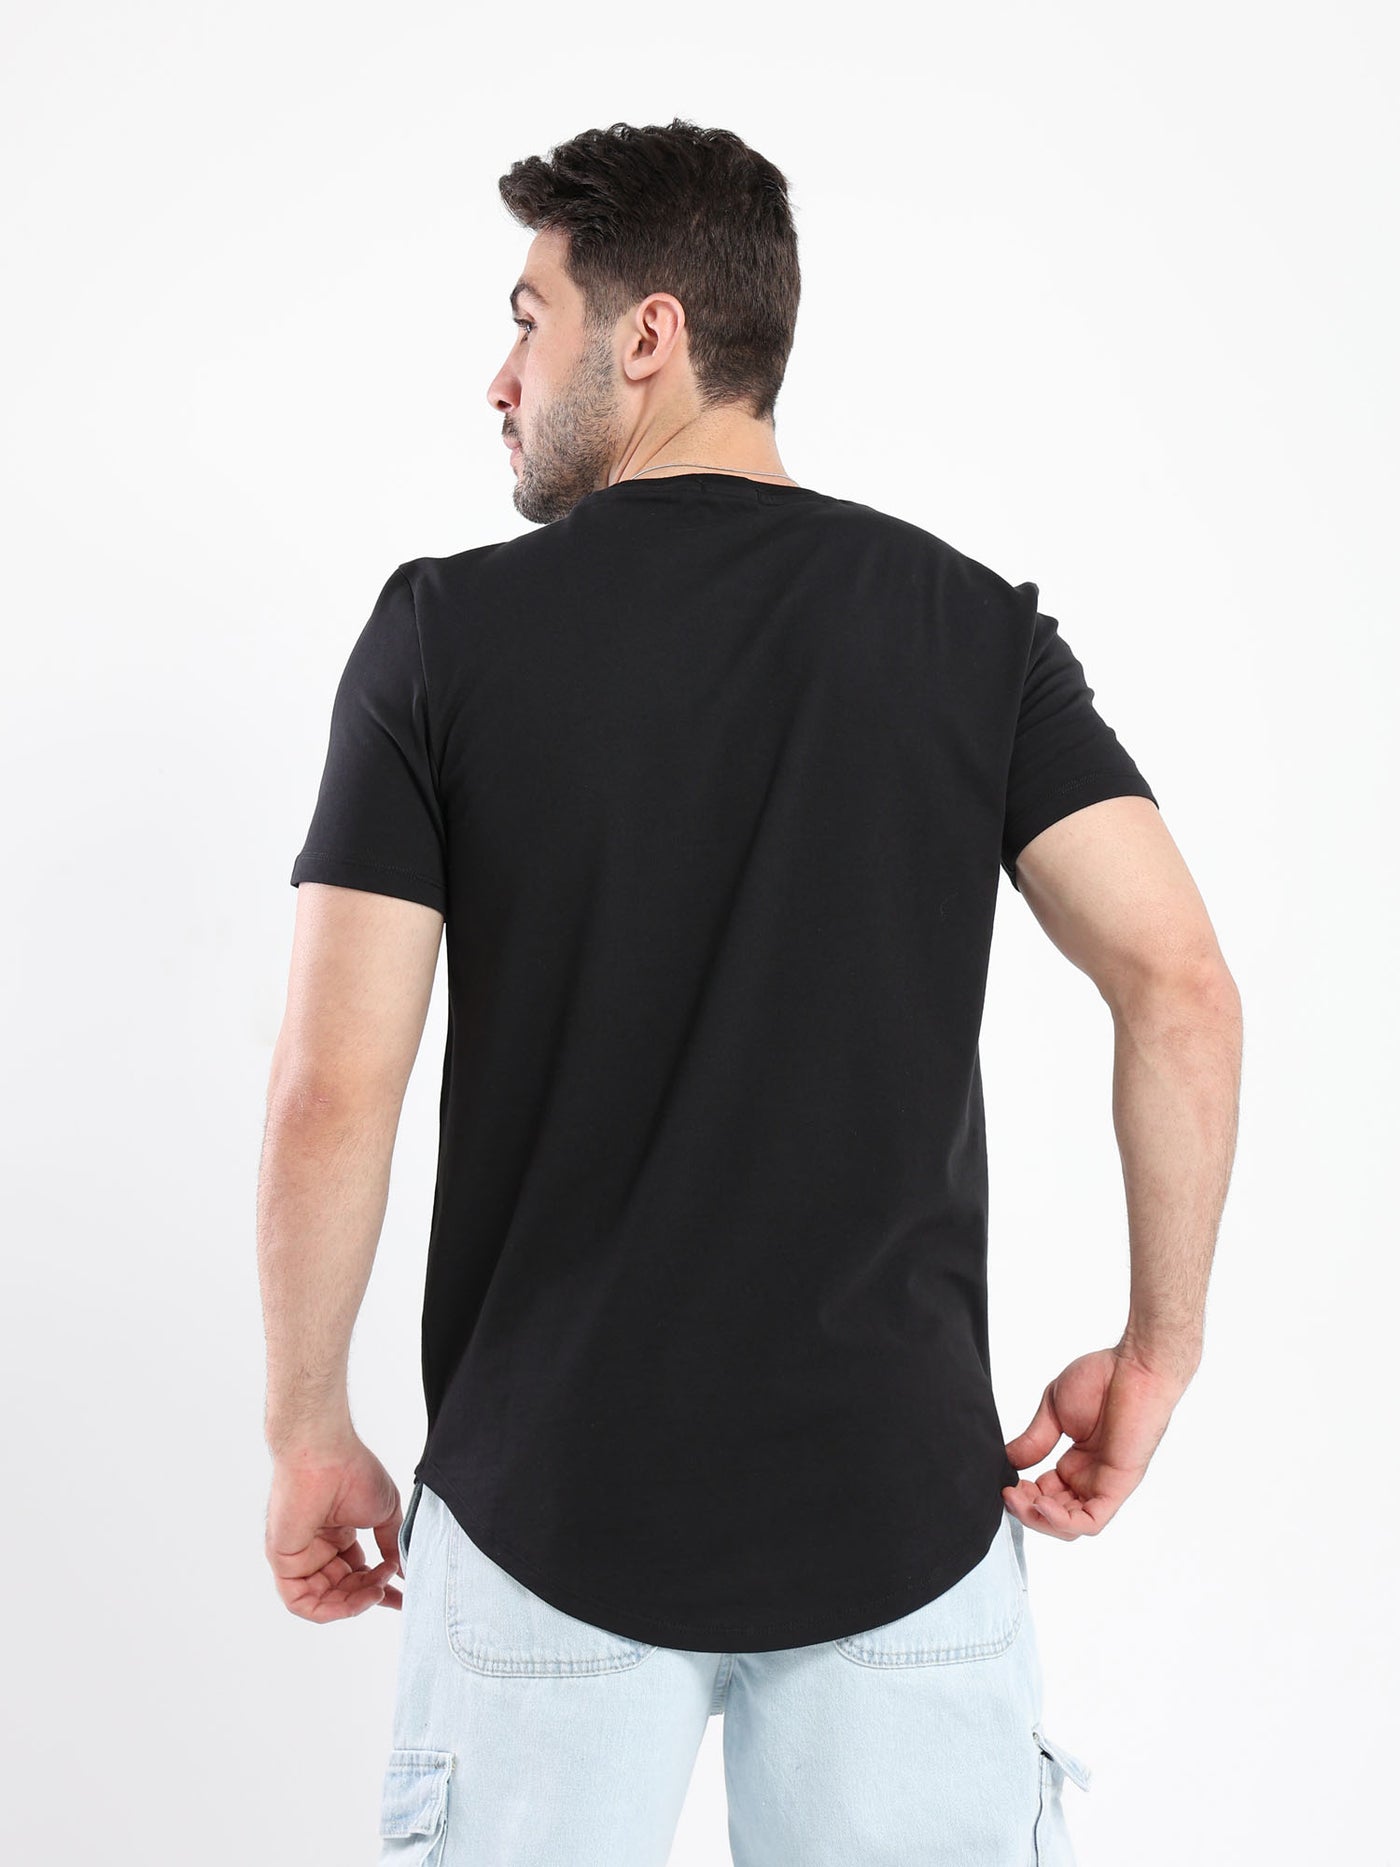 T-Shirt - Long Fit - Reflective Tape